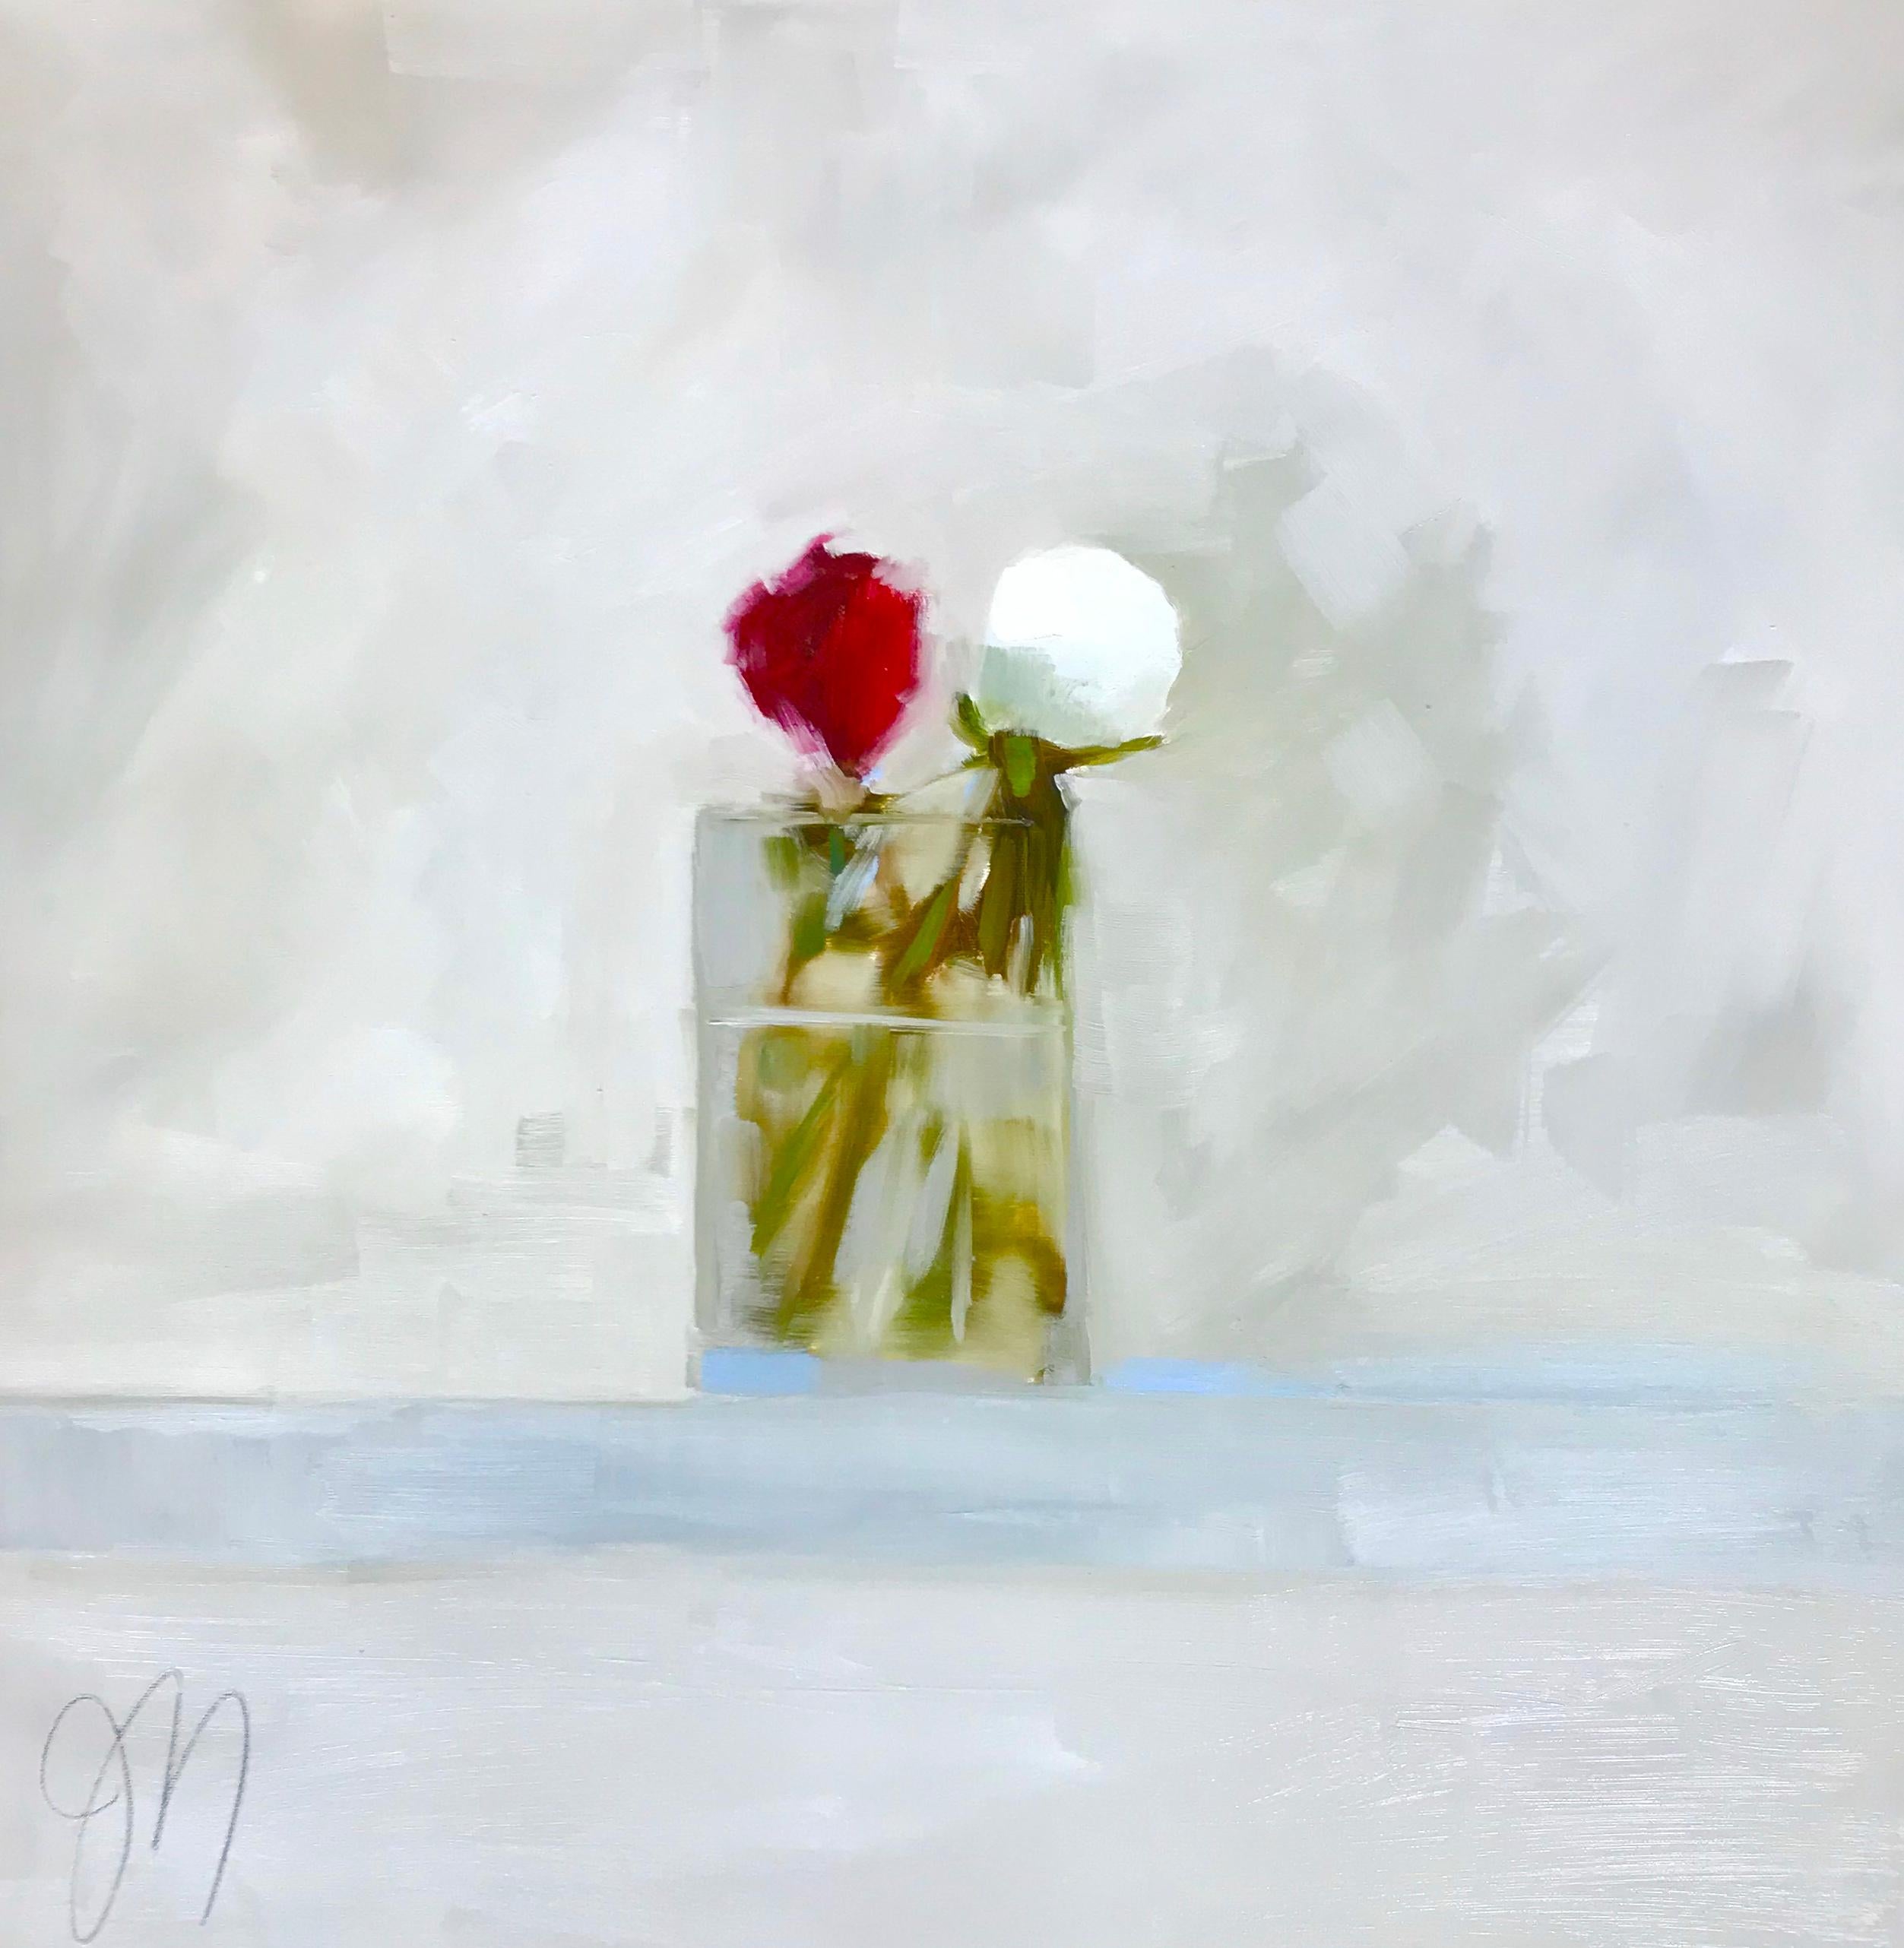 Jill Matthews Still-Life Painting - "Two Peony Bud" Impressionist style oil painting of white and red peonies